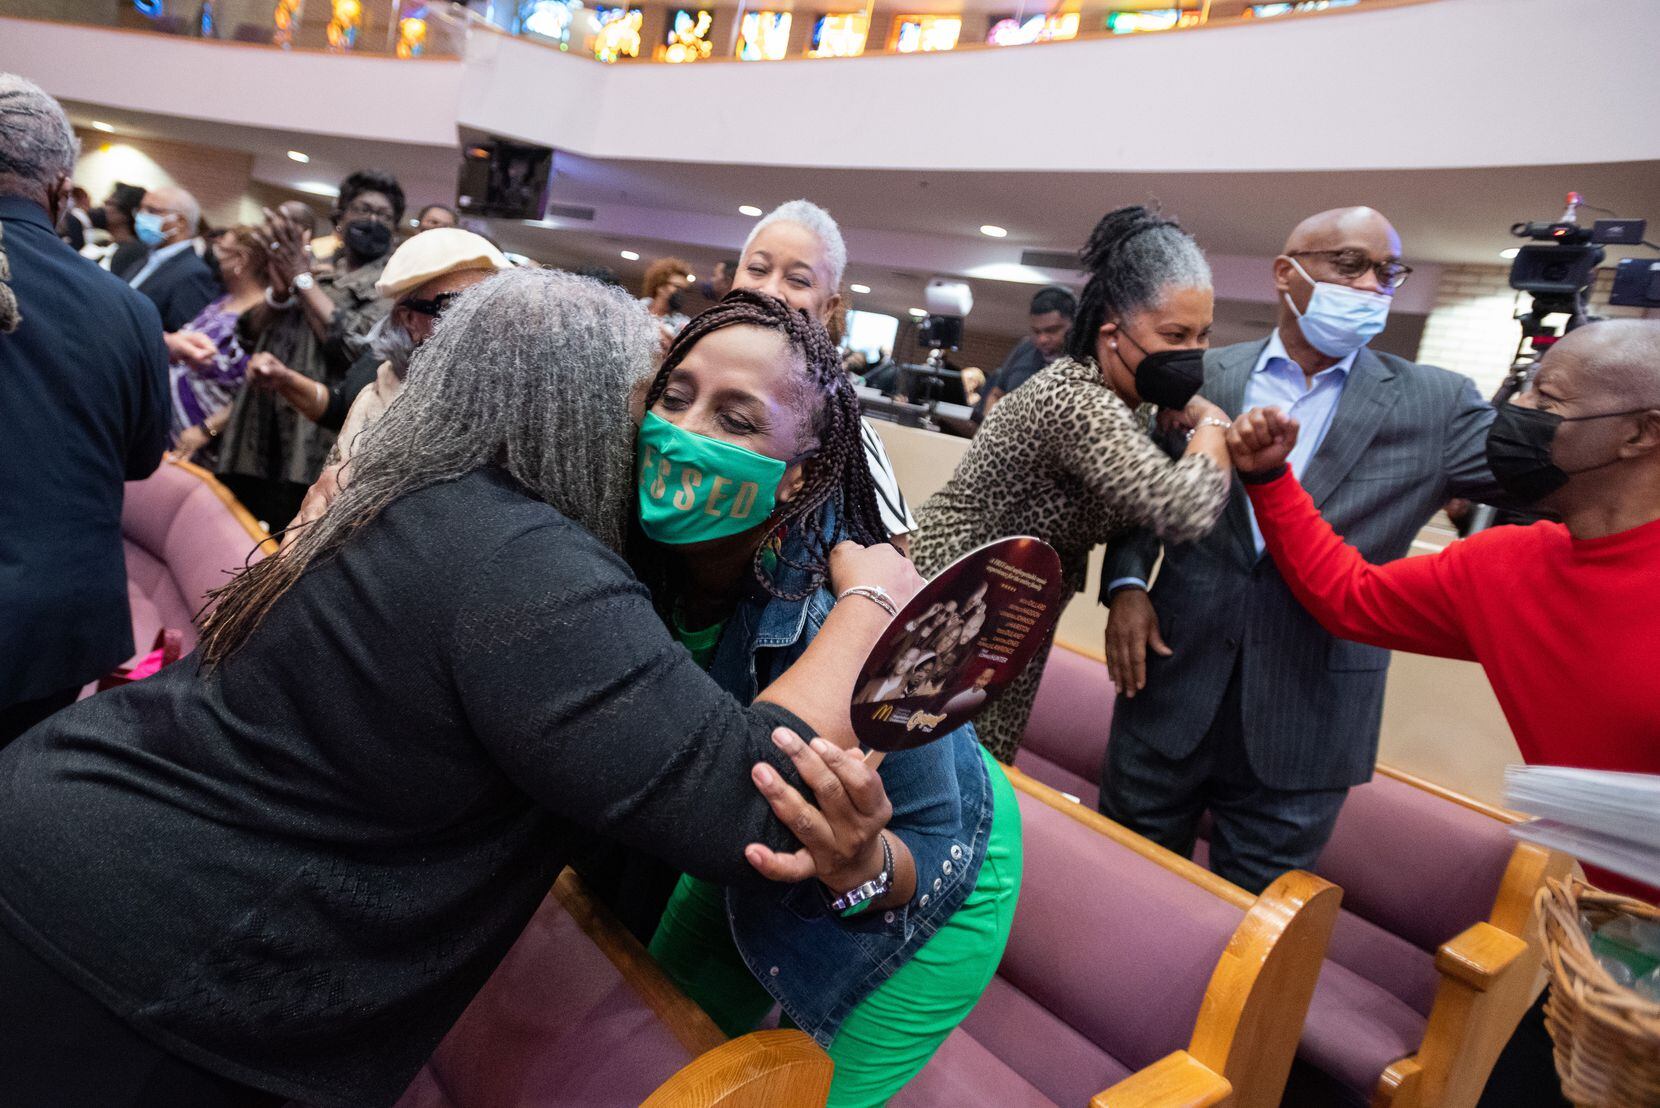 Church members Jyla Kuykendall (left) and Karen Stepherson hugged Sunday at the start of the...